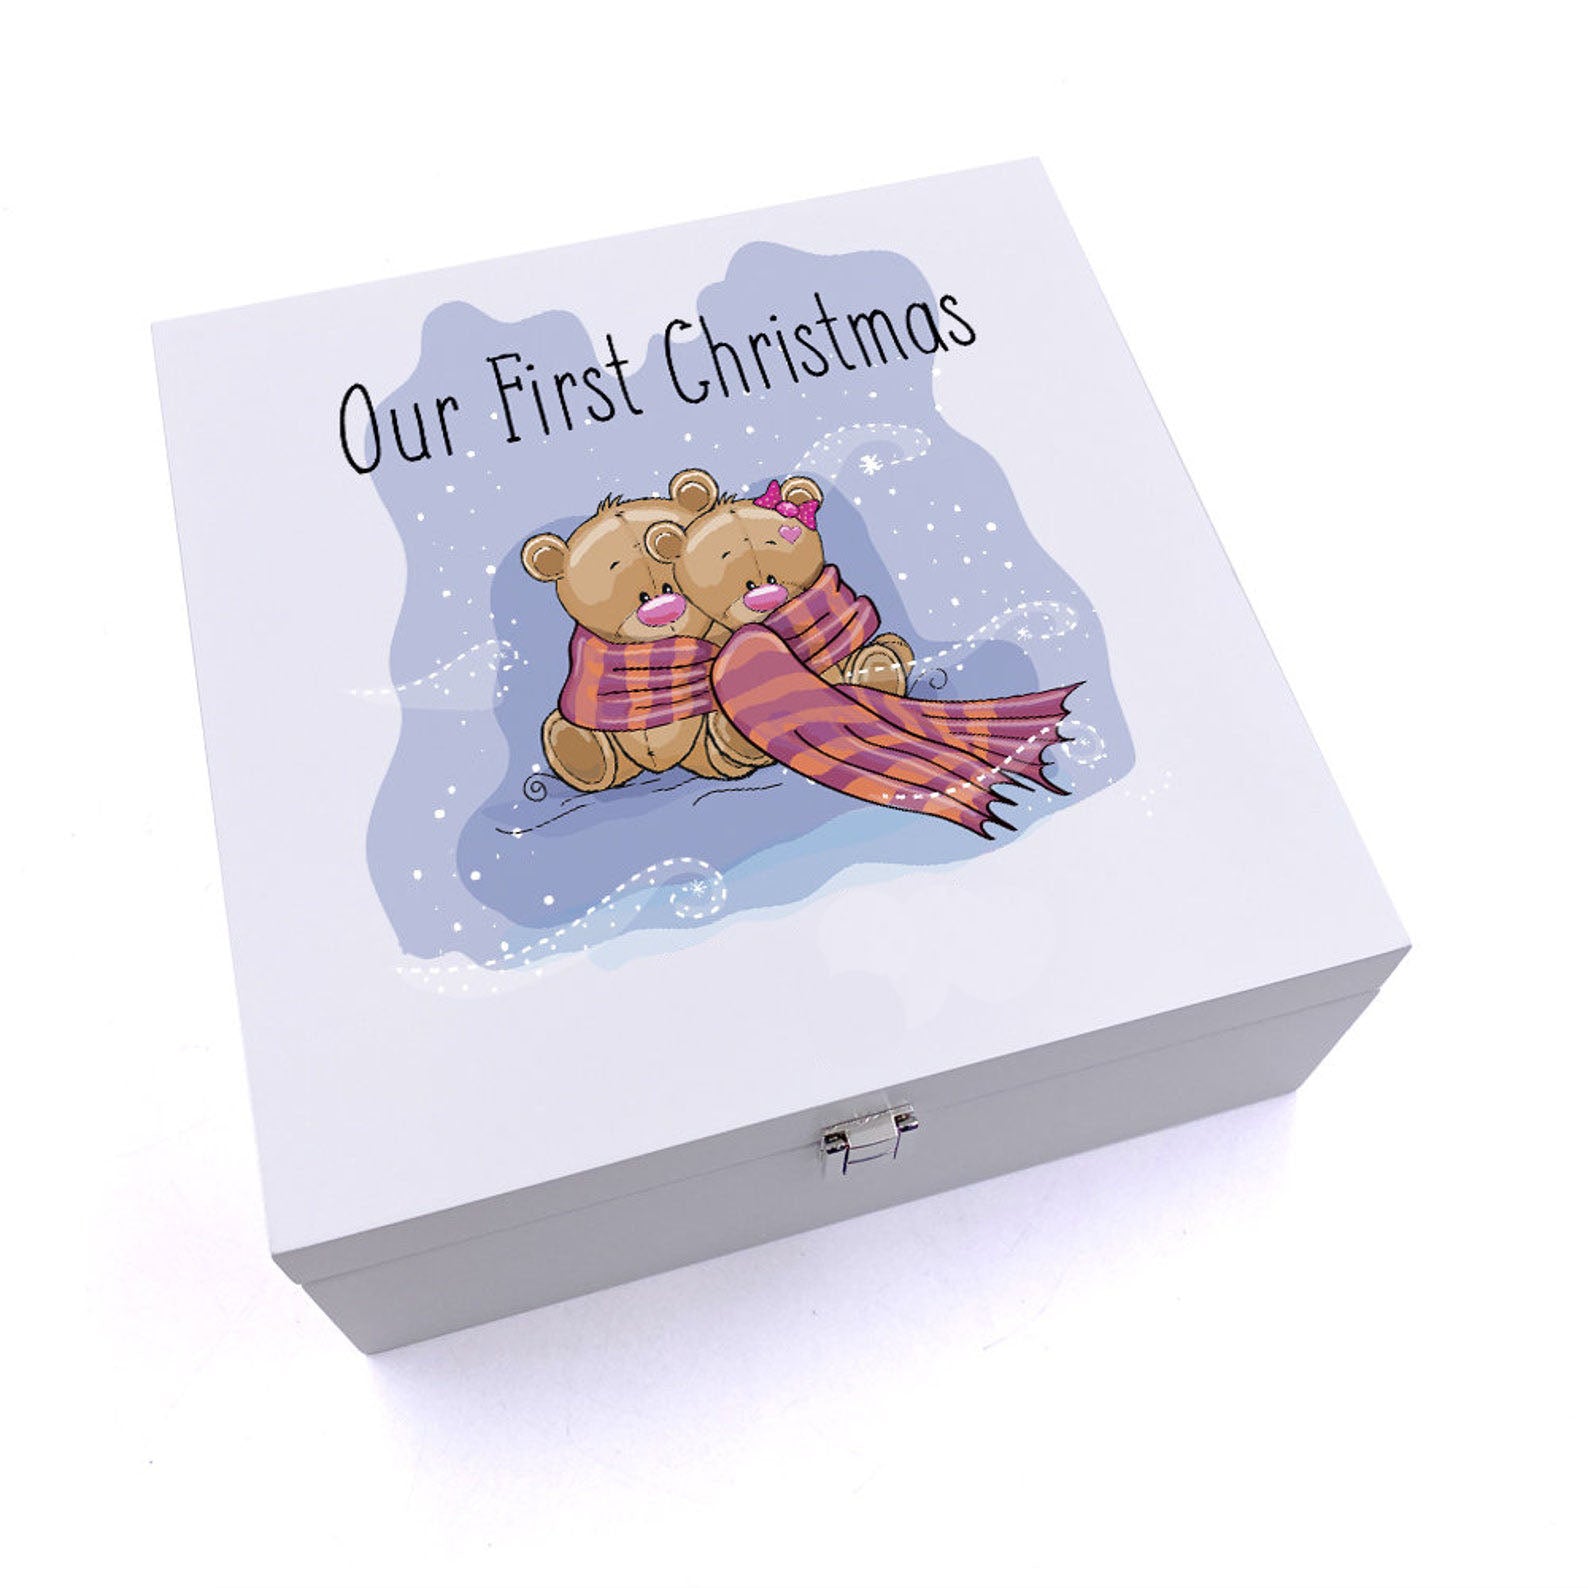 ukgiftstoreonline Personalised Our First Christmas Keepsake Wooden Box